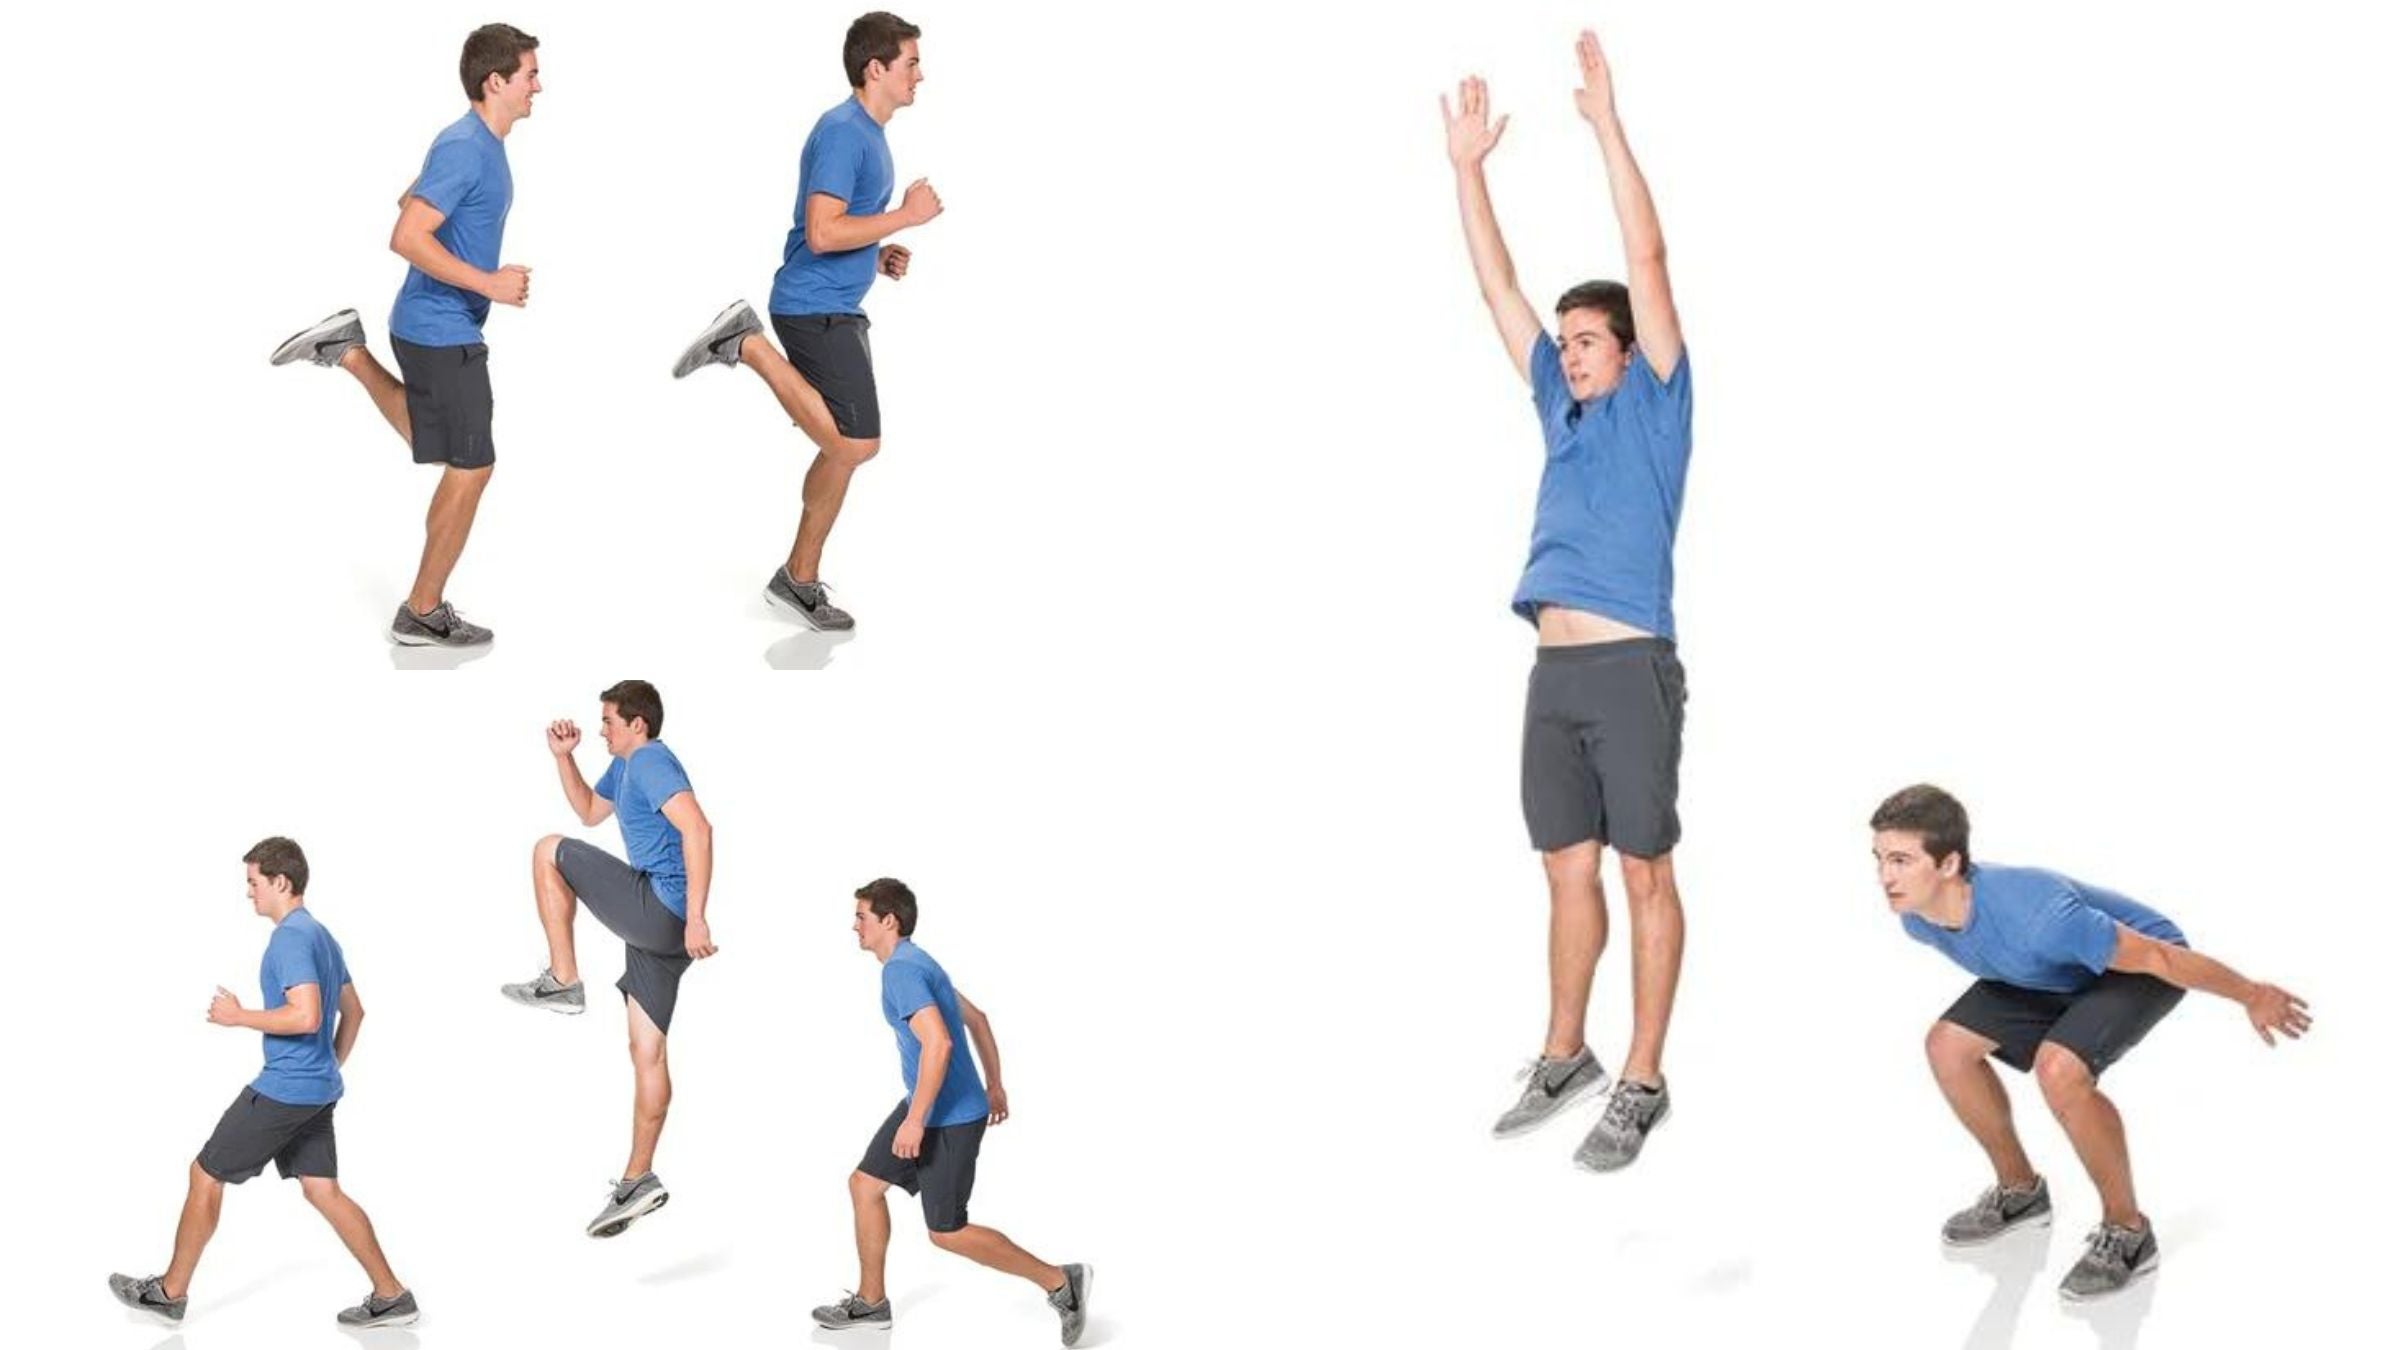 A 5-Minute Plyometric Warm-Up to Unlock Your Running Power